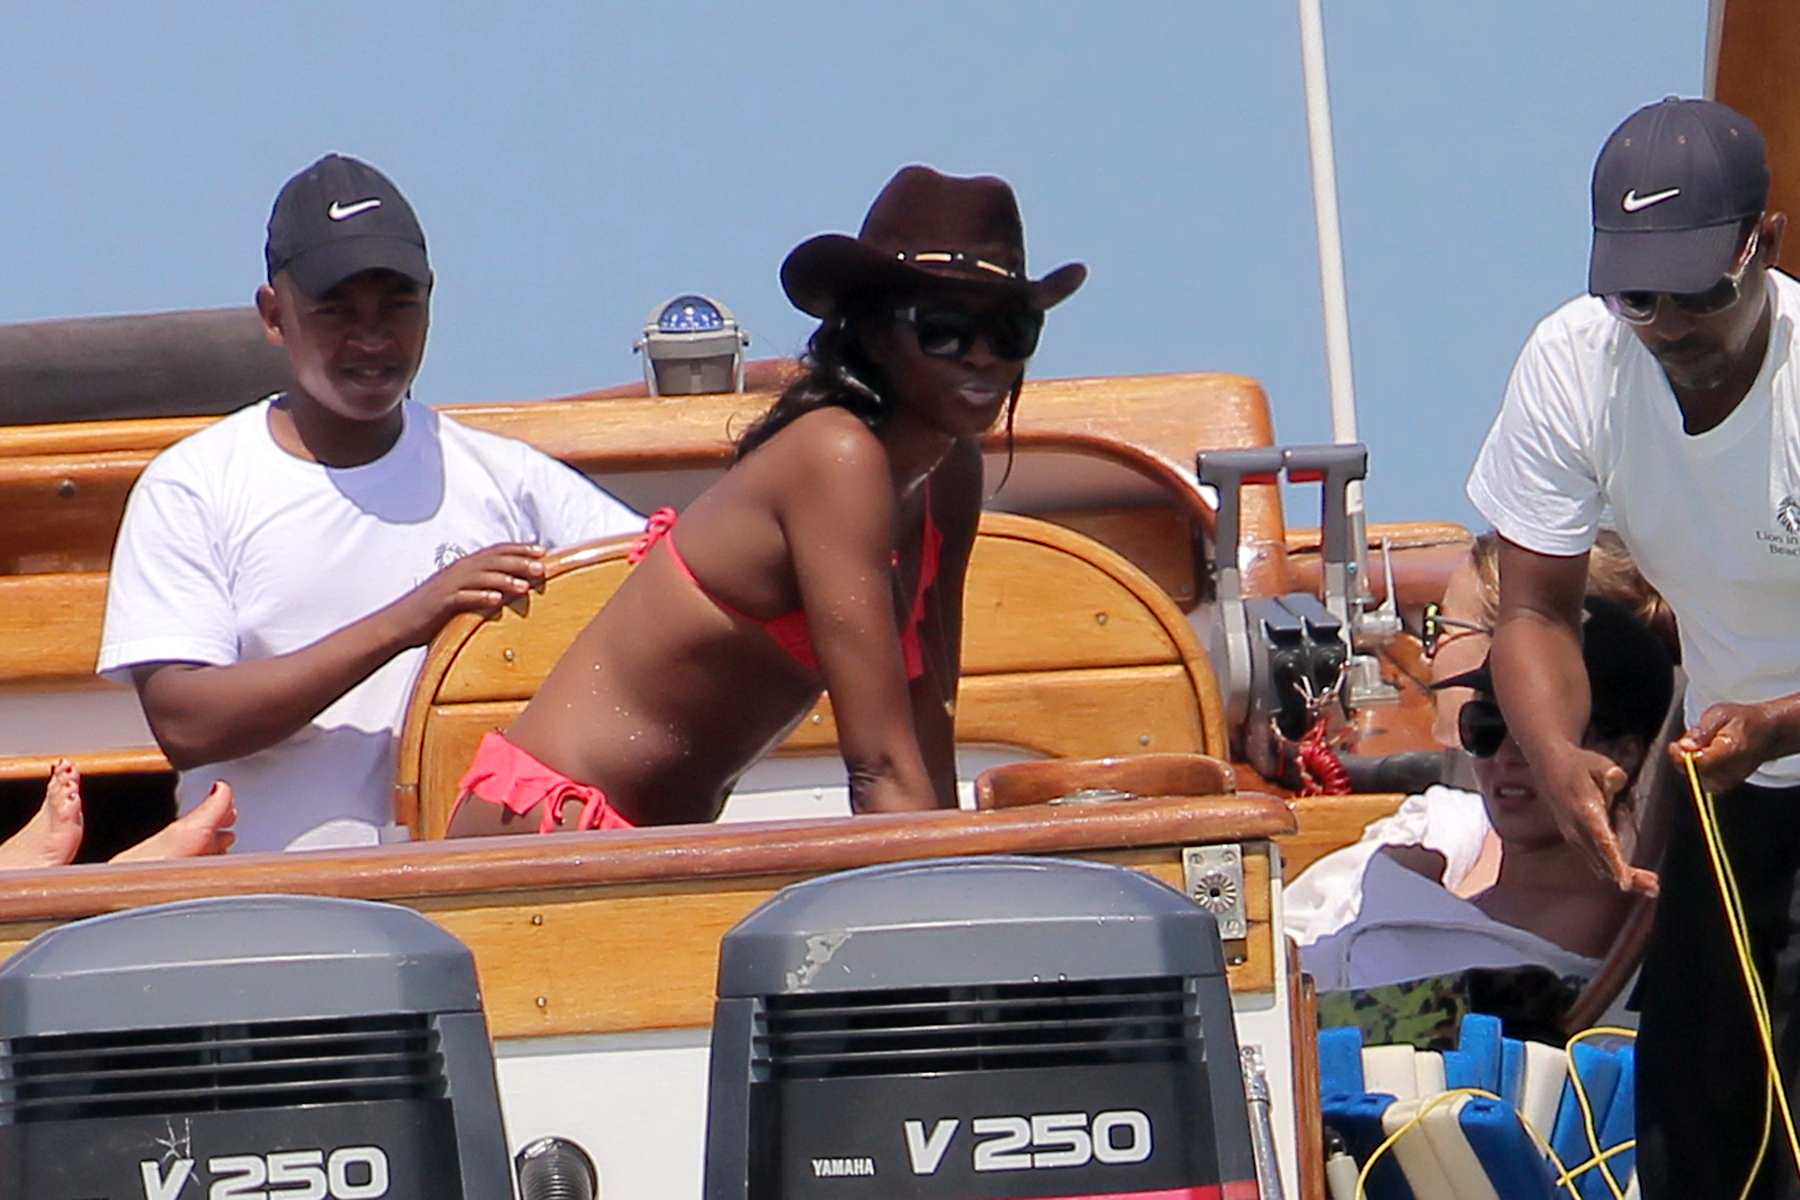 Naomi Campbell shows off her ass wearing a pink bikini on a yacht in Kenya #75208313